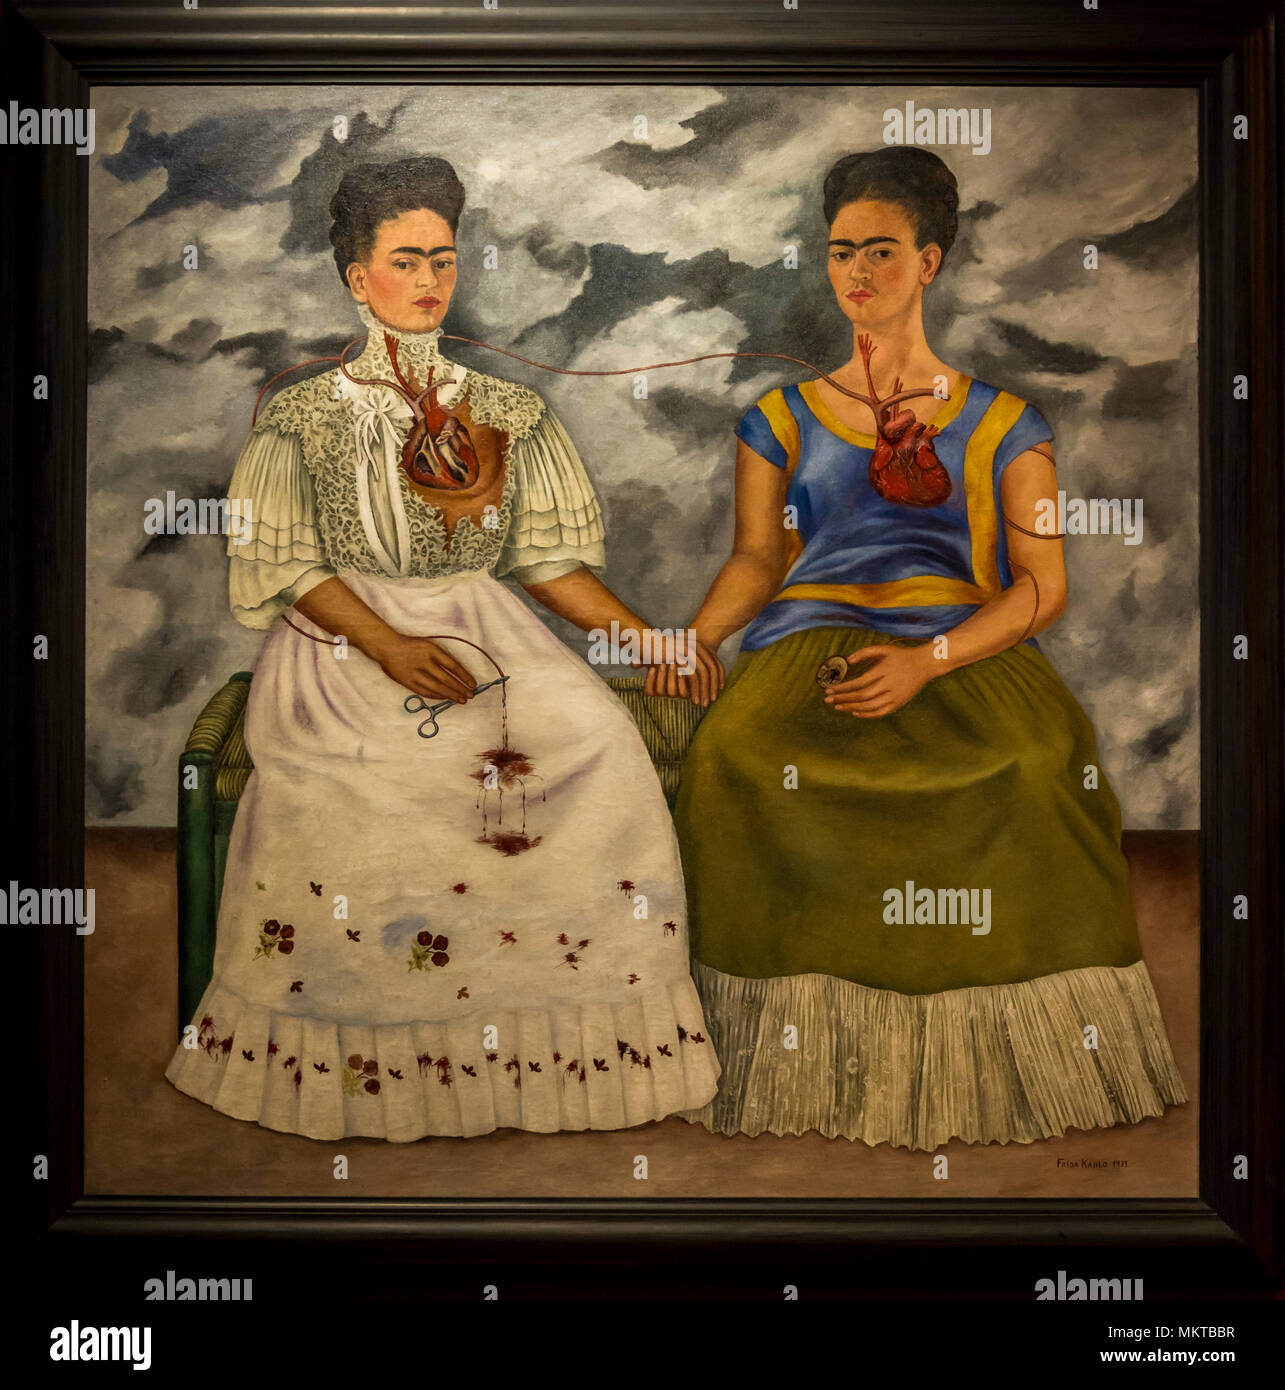 Painting by Frida Kahlo 'Two Fridas', 1939, Museum of Modern Art,  Chapultepec Park, Mexico City, Mexico Stock Photo - Alamy